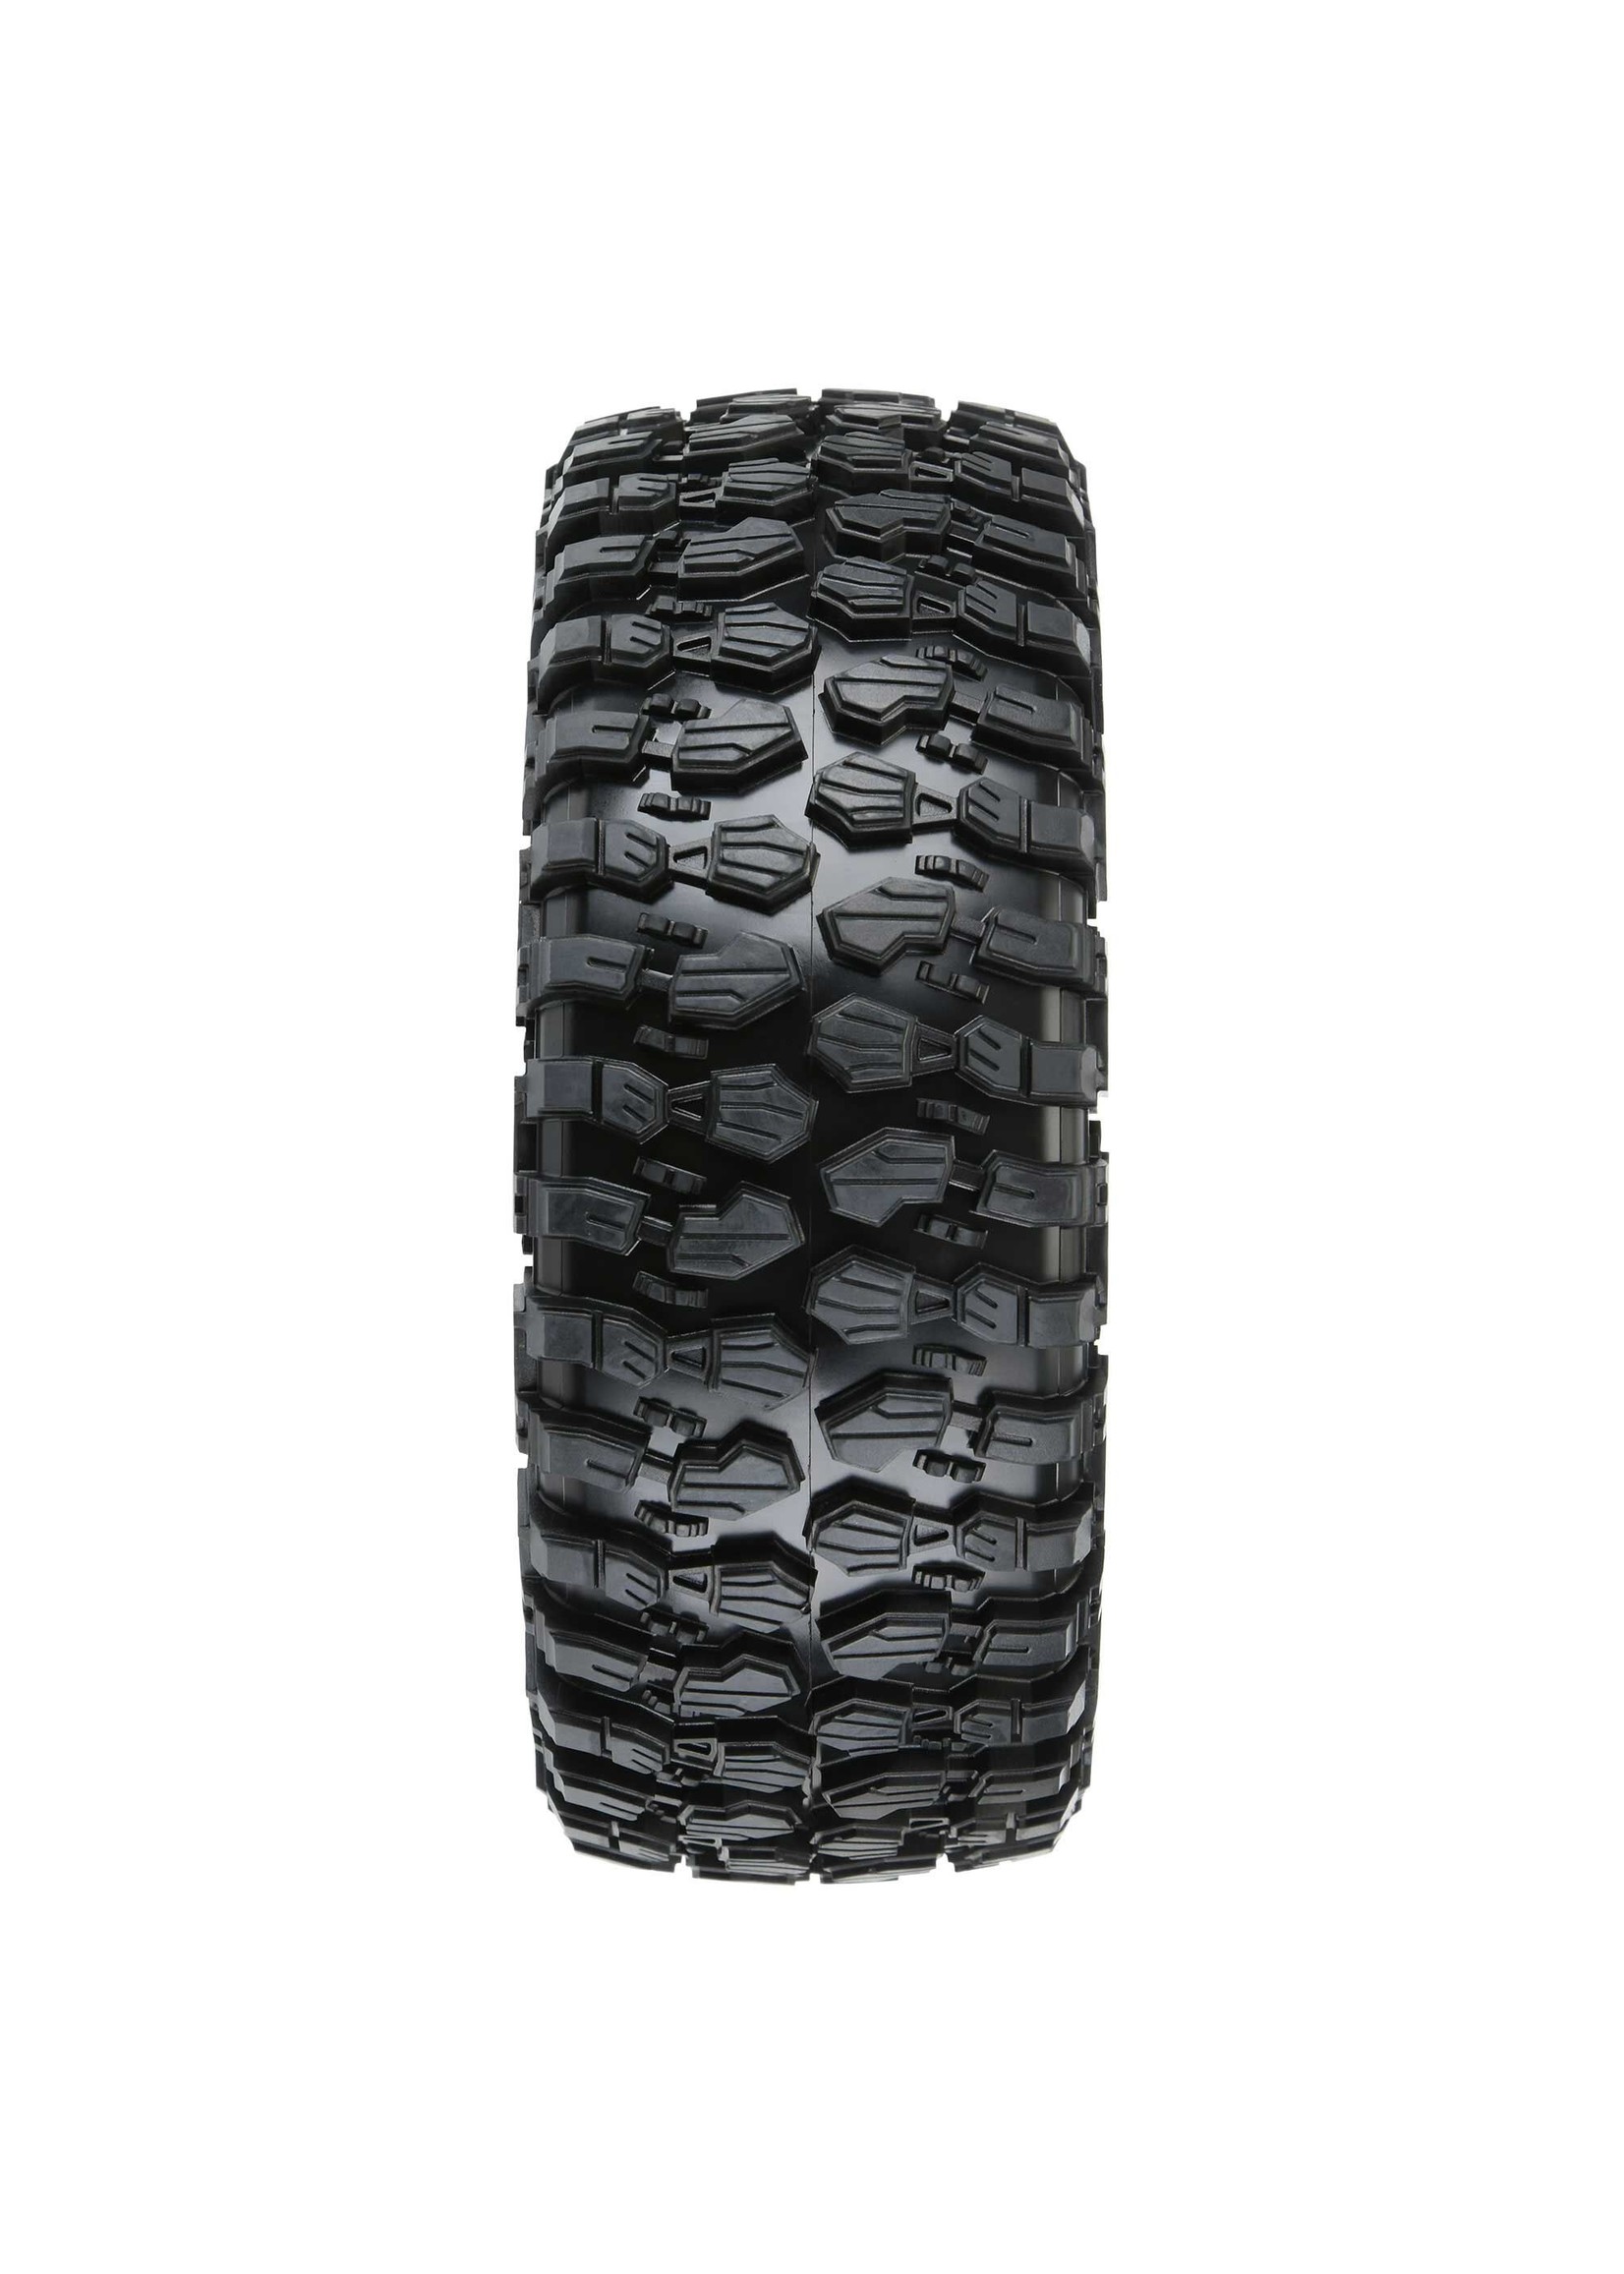 Pro-Line PRO1018614 - 1/6 Hyrax XL G8 Front/Rear 2.9" Rock Crawling Tires